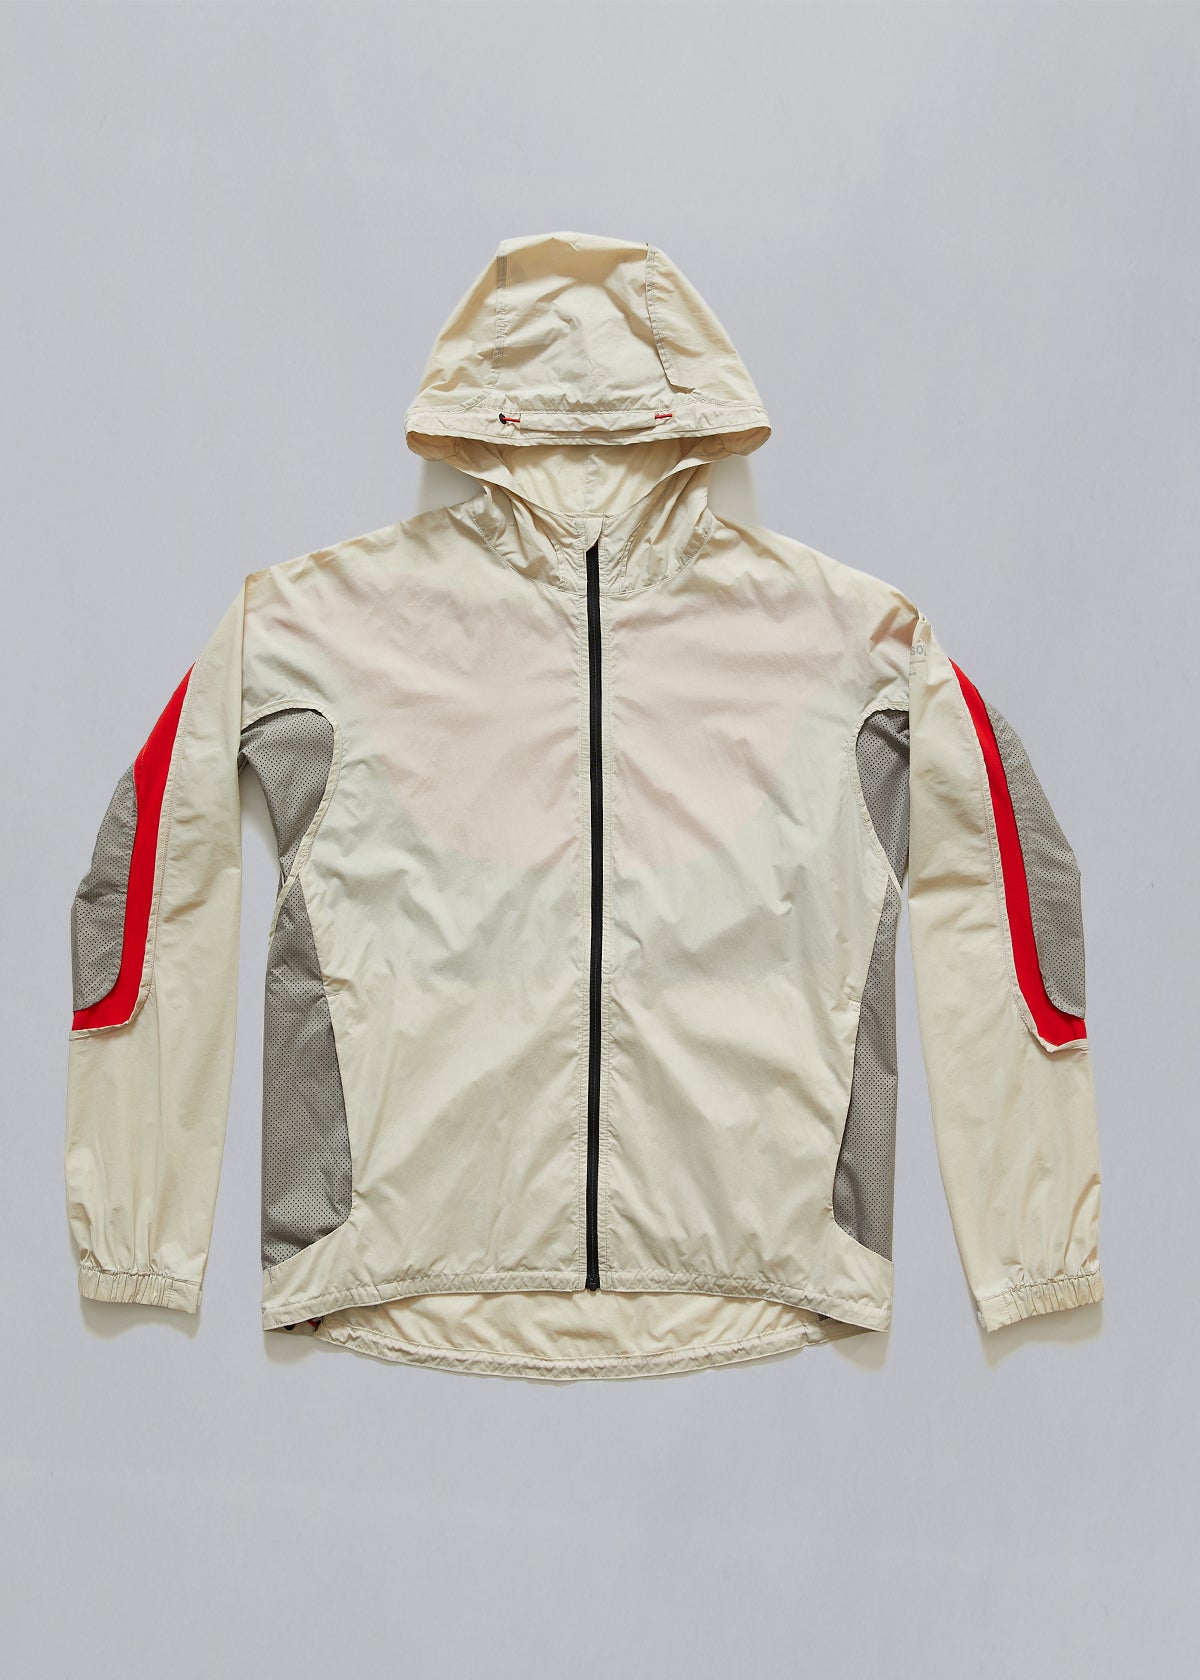 Incidente, evento Puñado Campo Nike/Gyakusou Layered Running Jacket SS2011 - Large – The Archivist Store